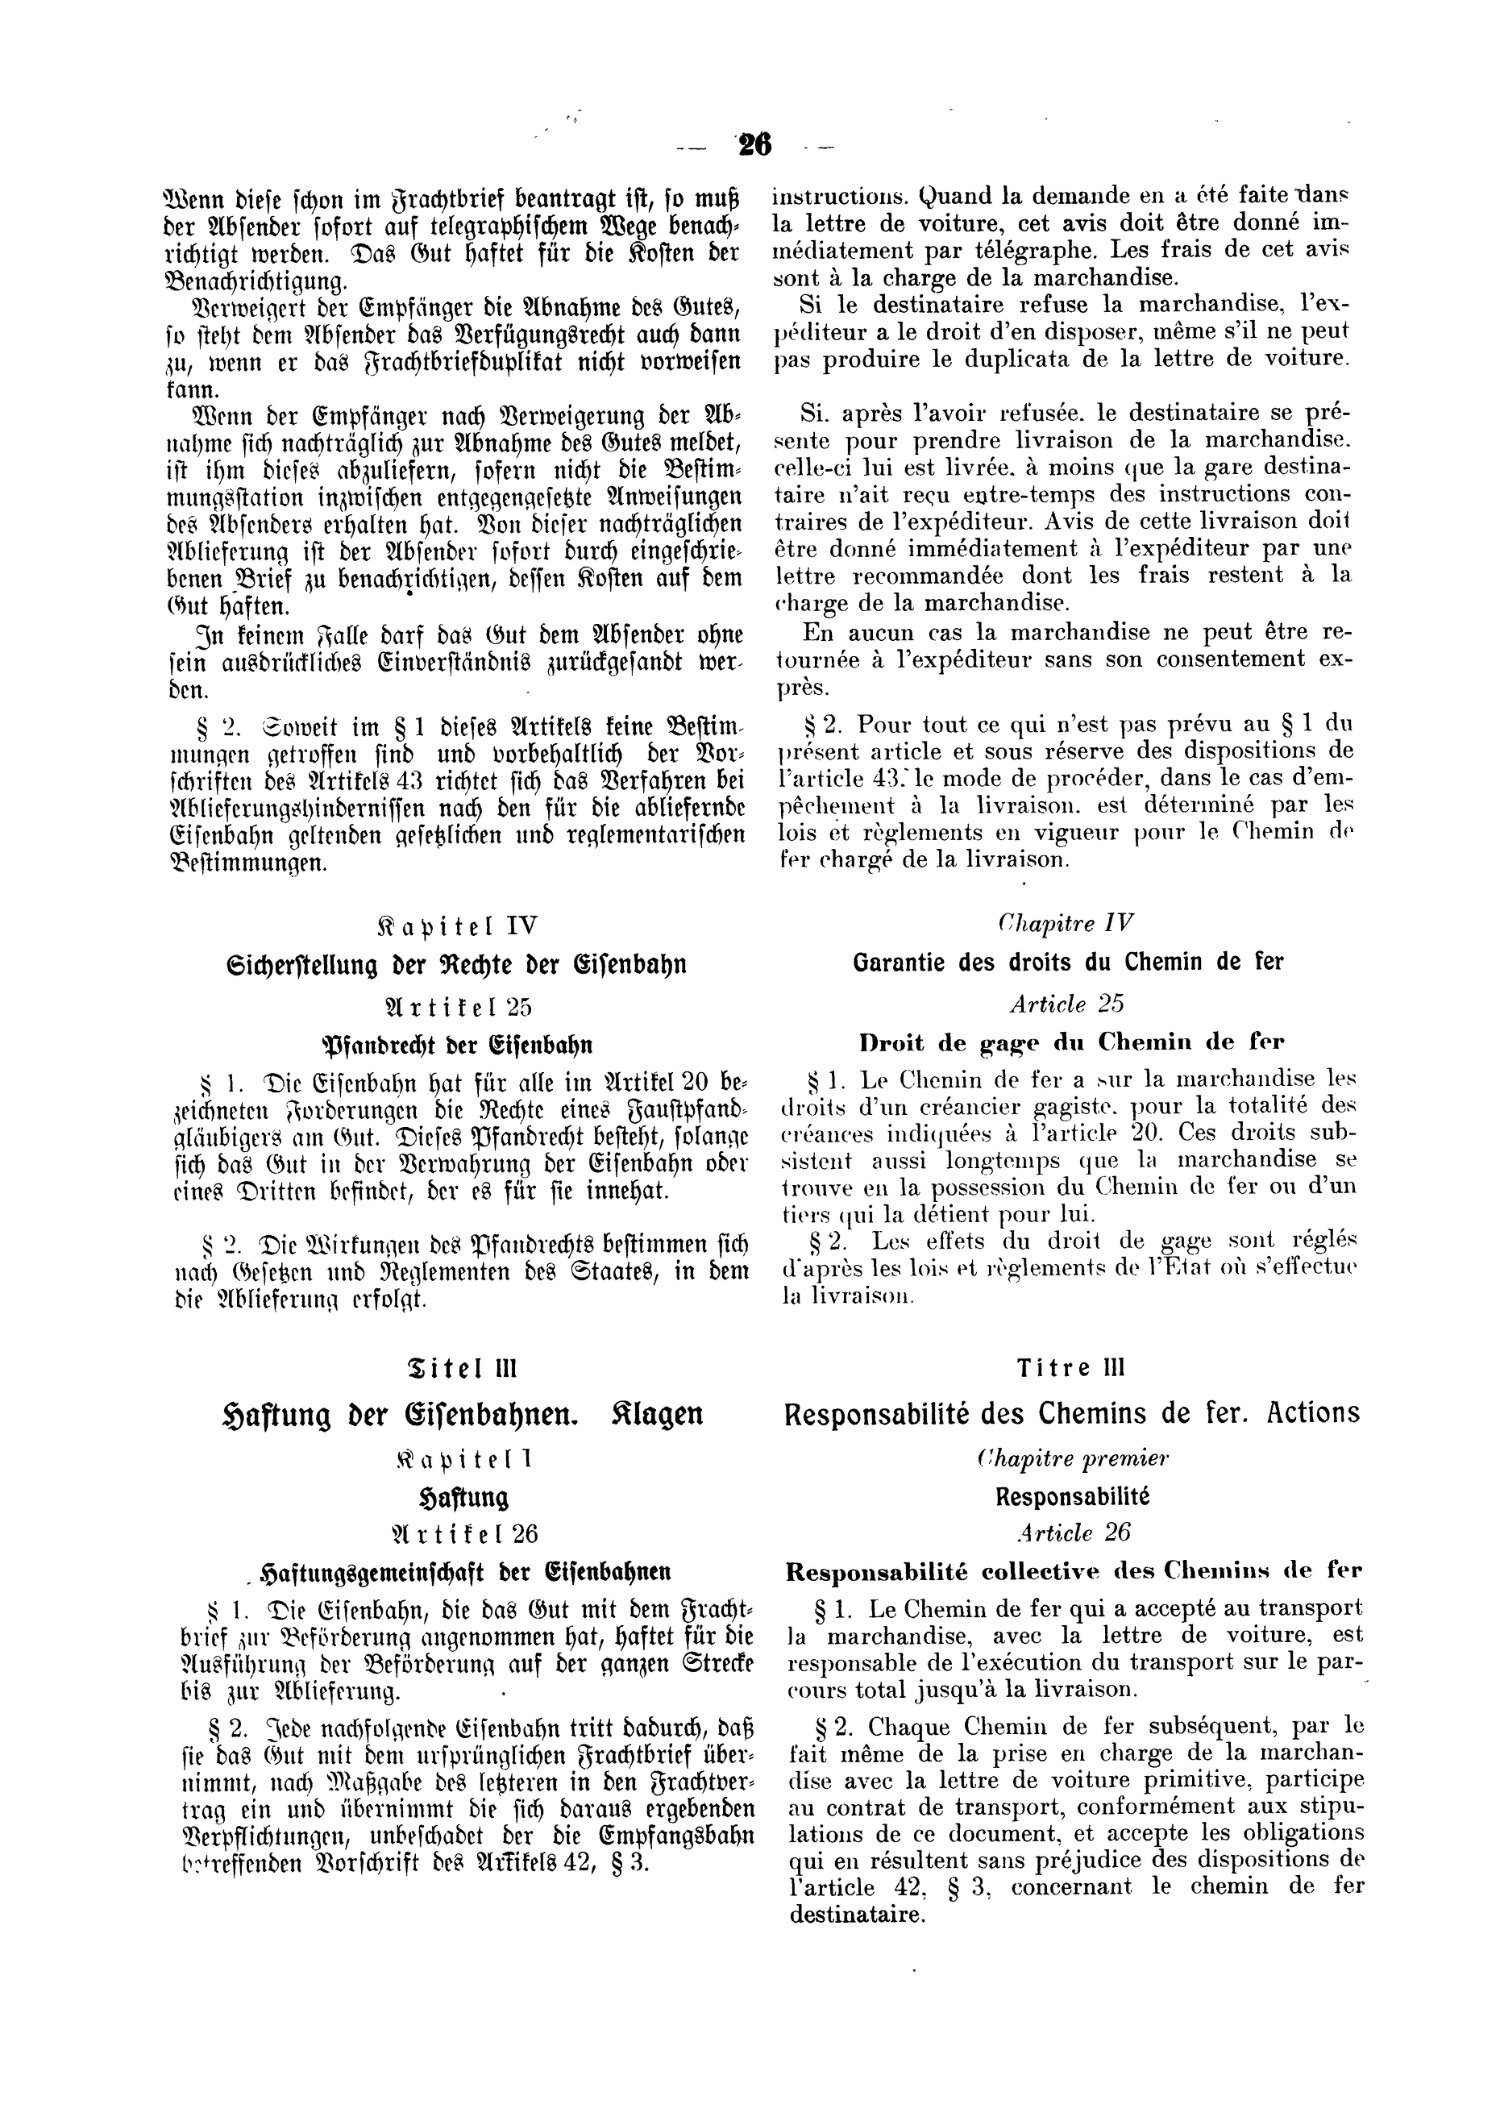 Scan of page 26